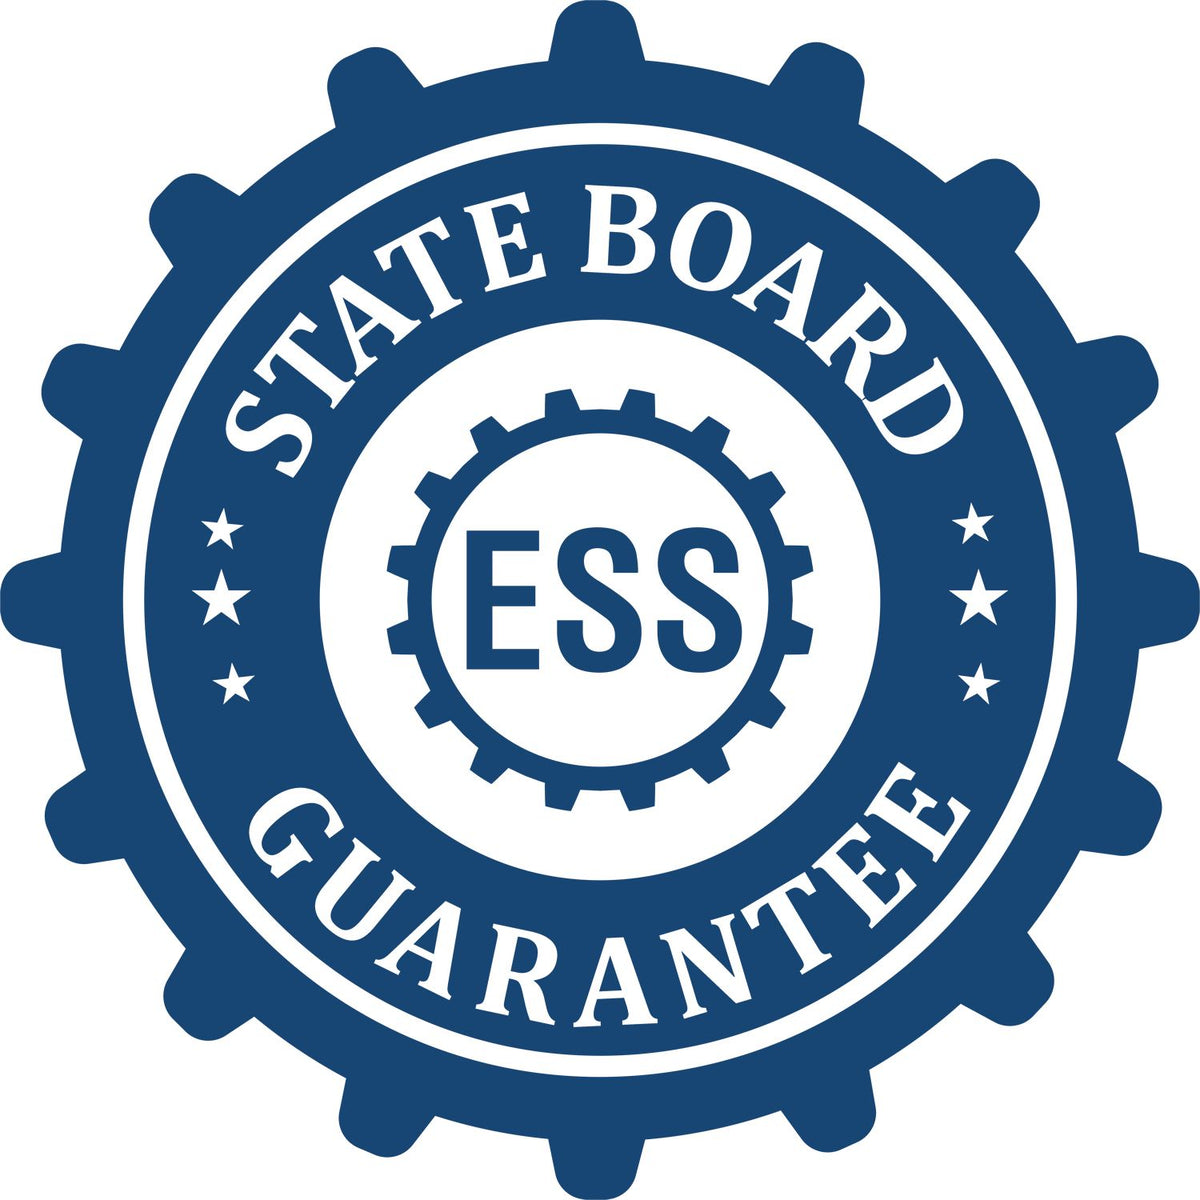 An emblem in a gear shape illustrating a state board guarantee for the Handheld Florida Professional Geologist Embosser